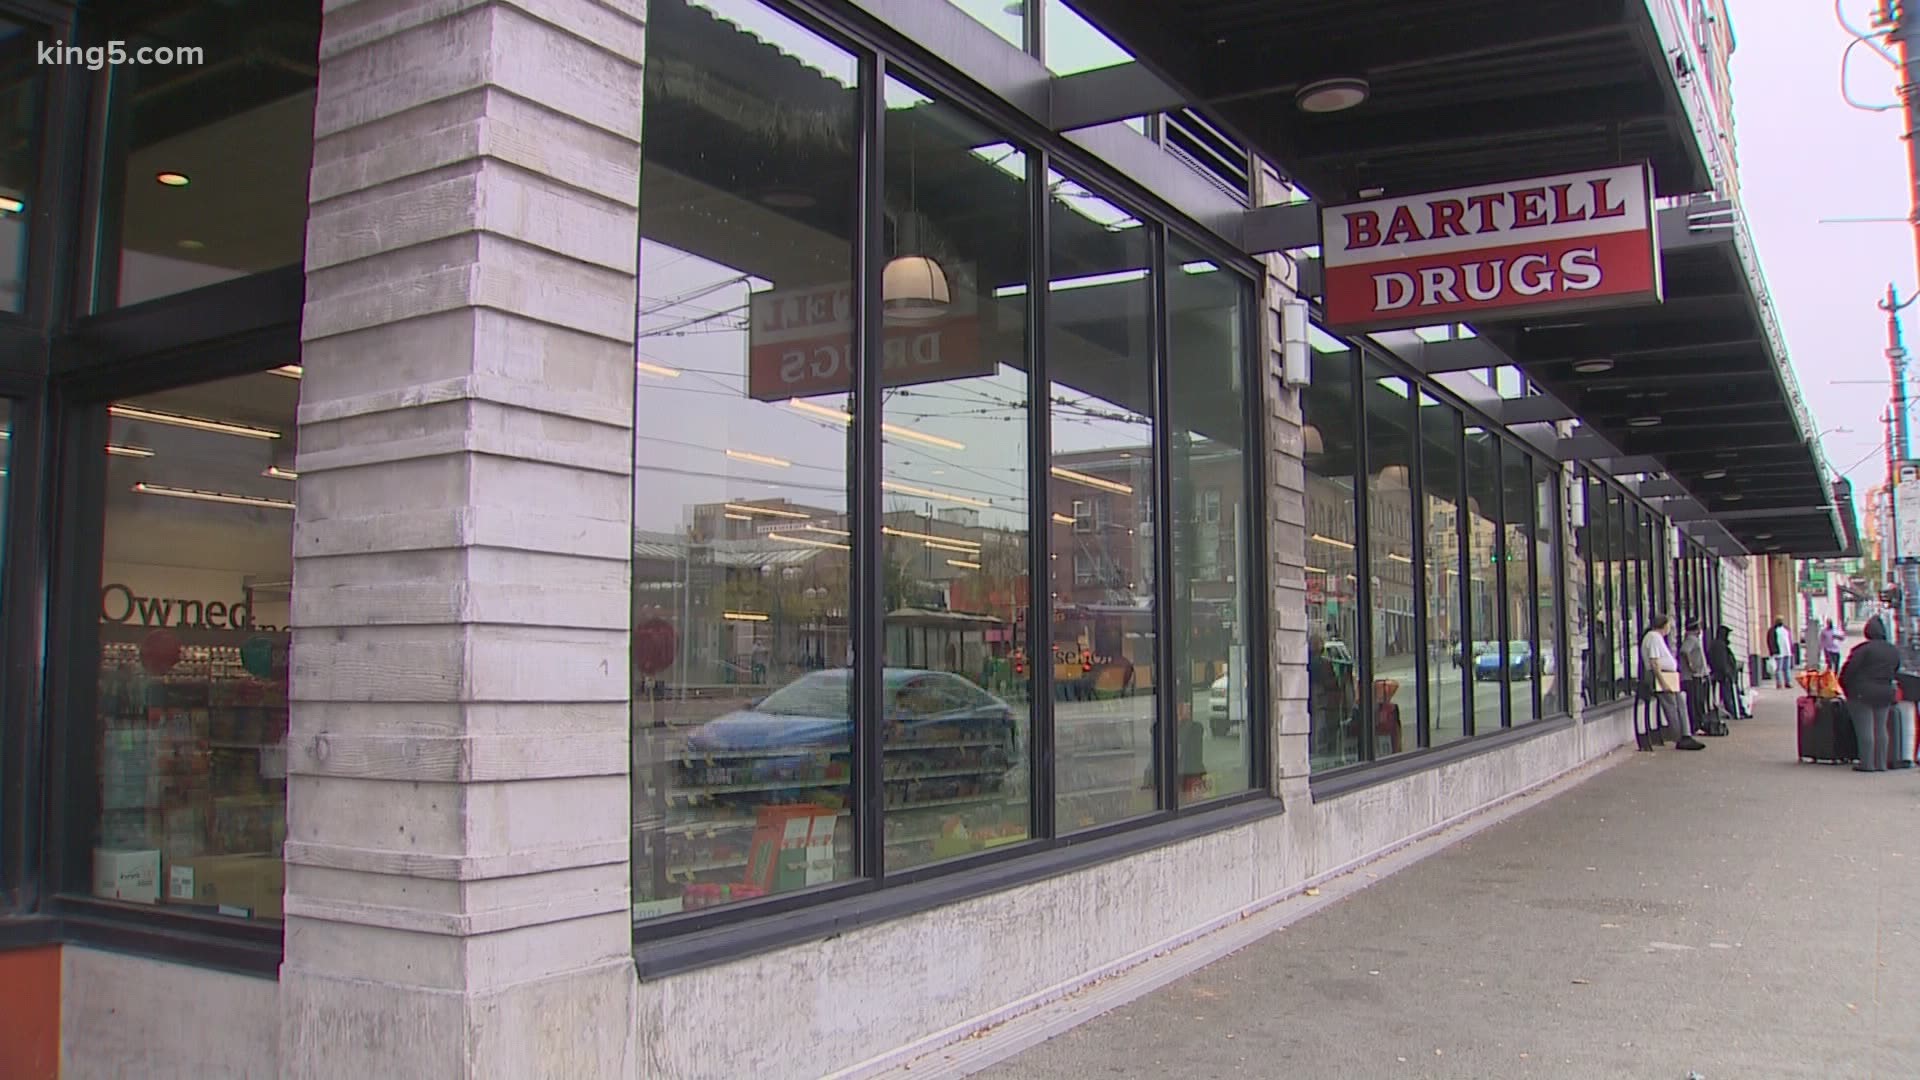 Family-owned Bartell Drugs, established 130 years ago, cited the rising costs of the coronavirus pandemic and Seattle business taxes as factors for the sale.